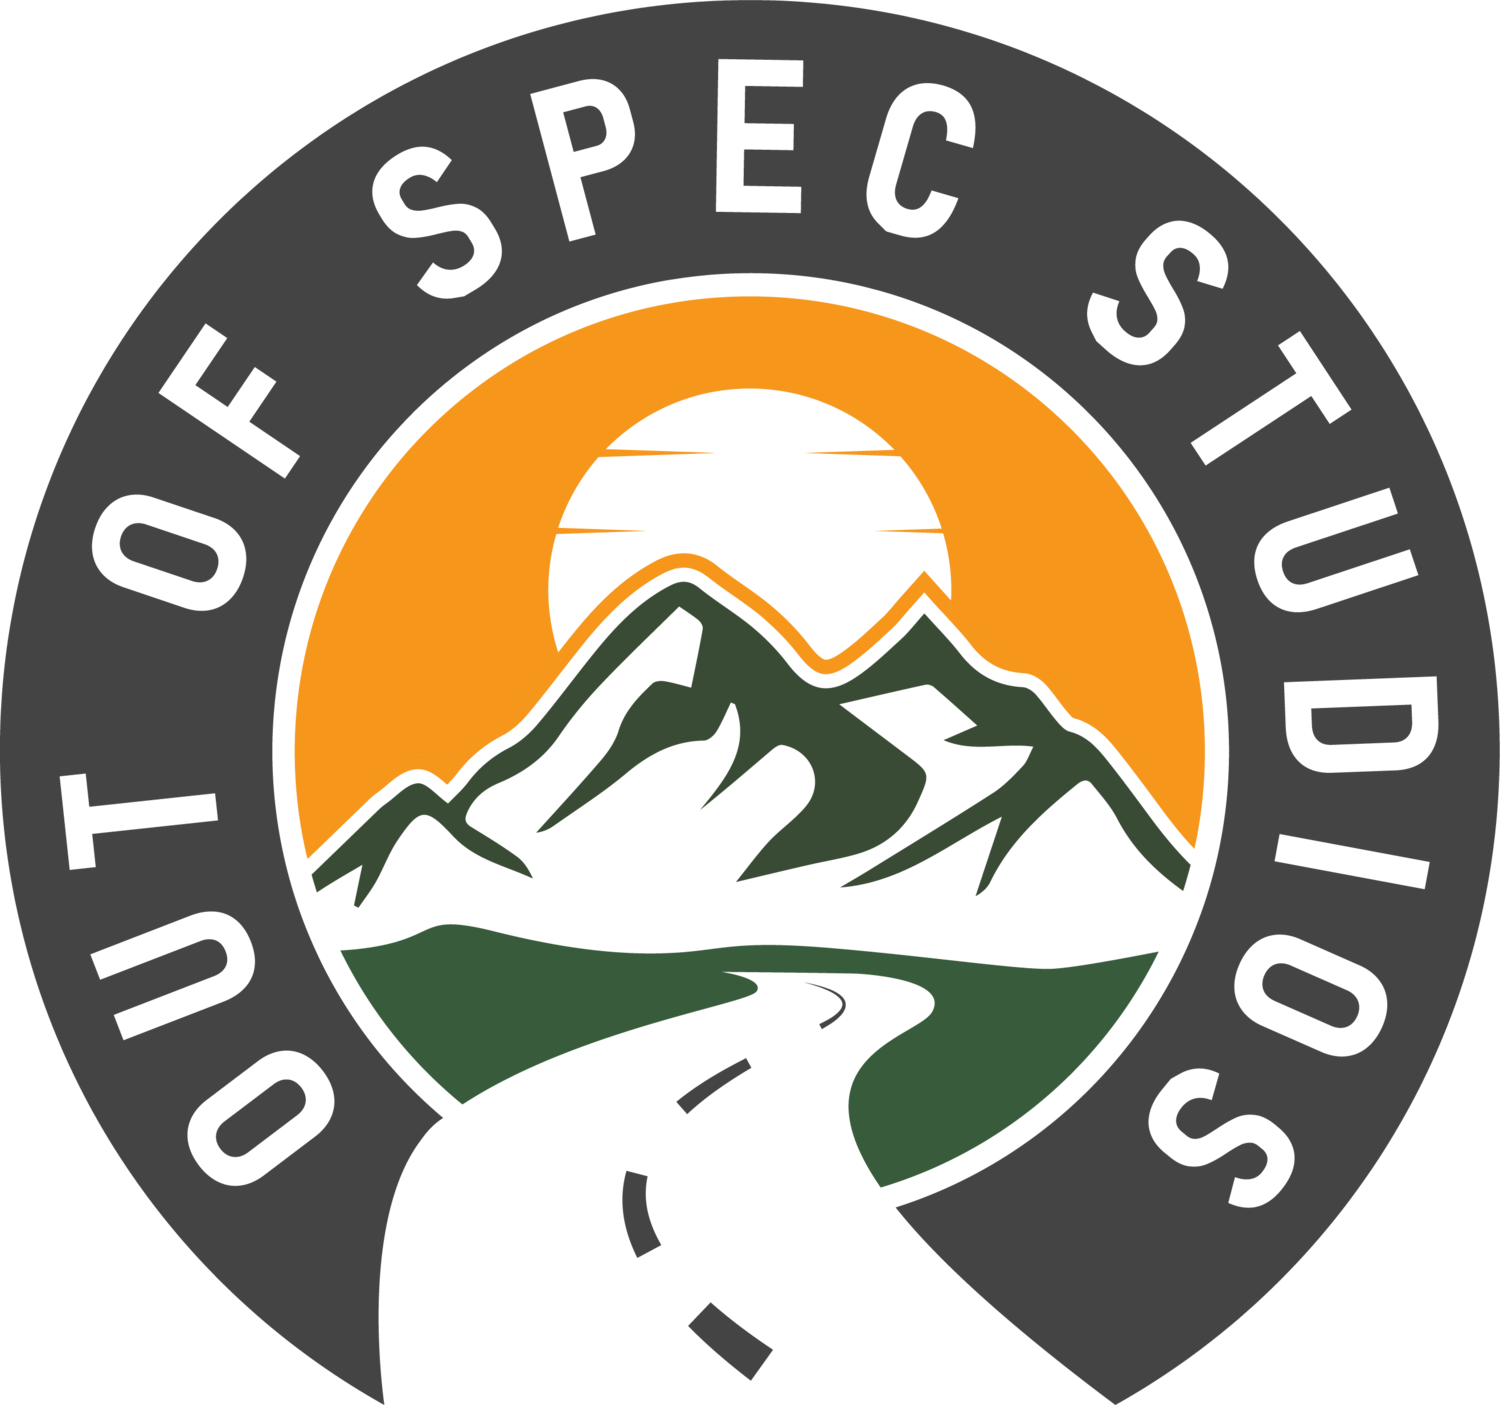 Out of Spec Studios